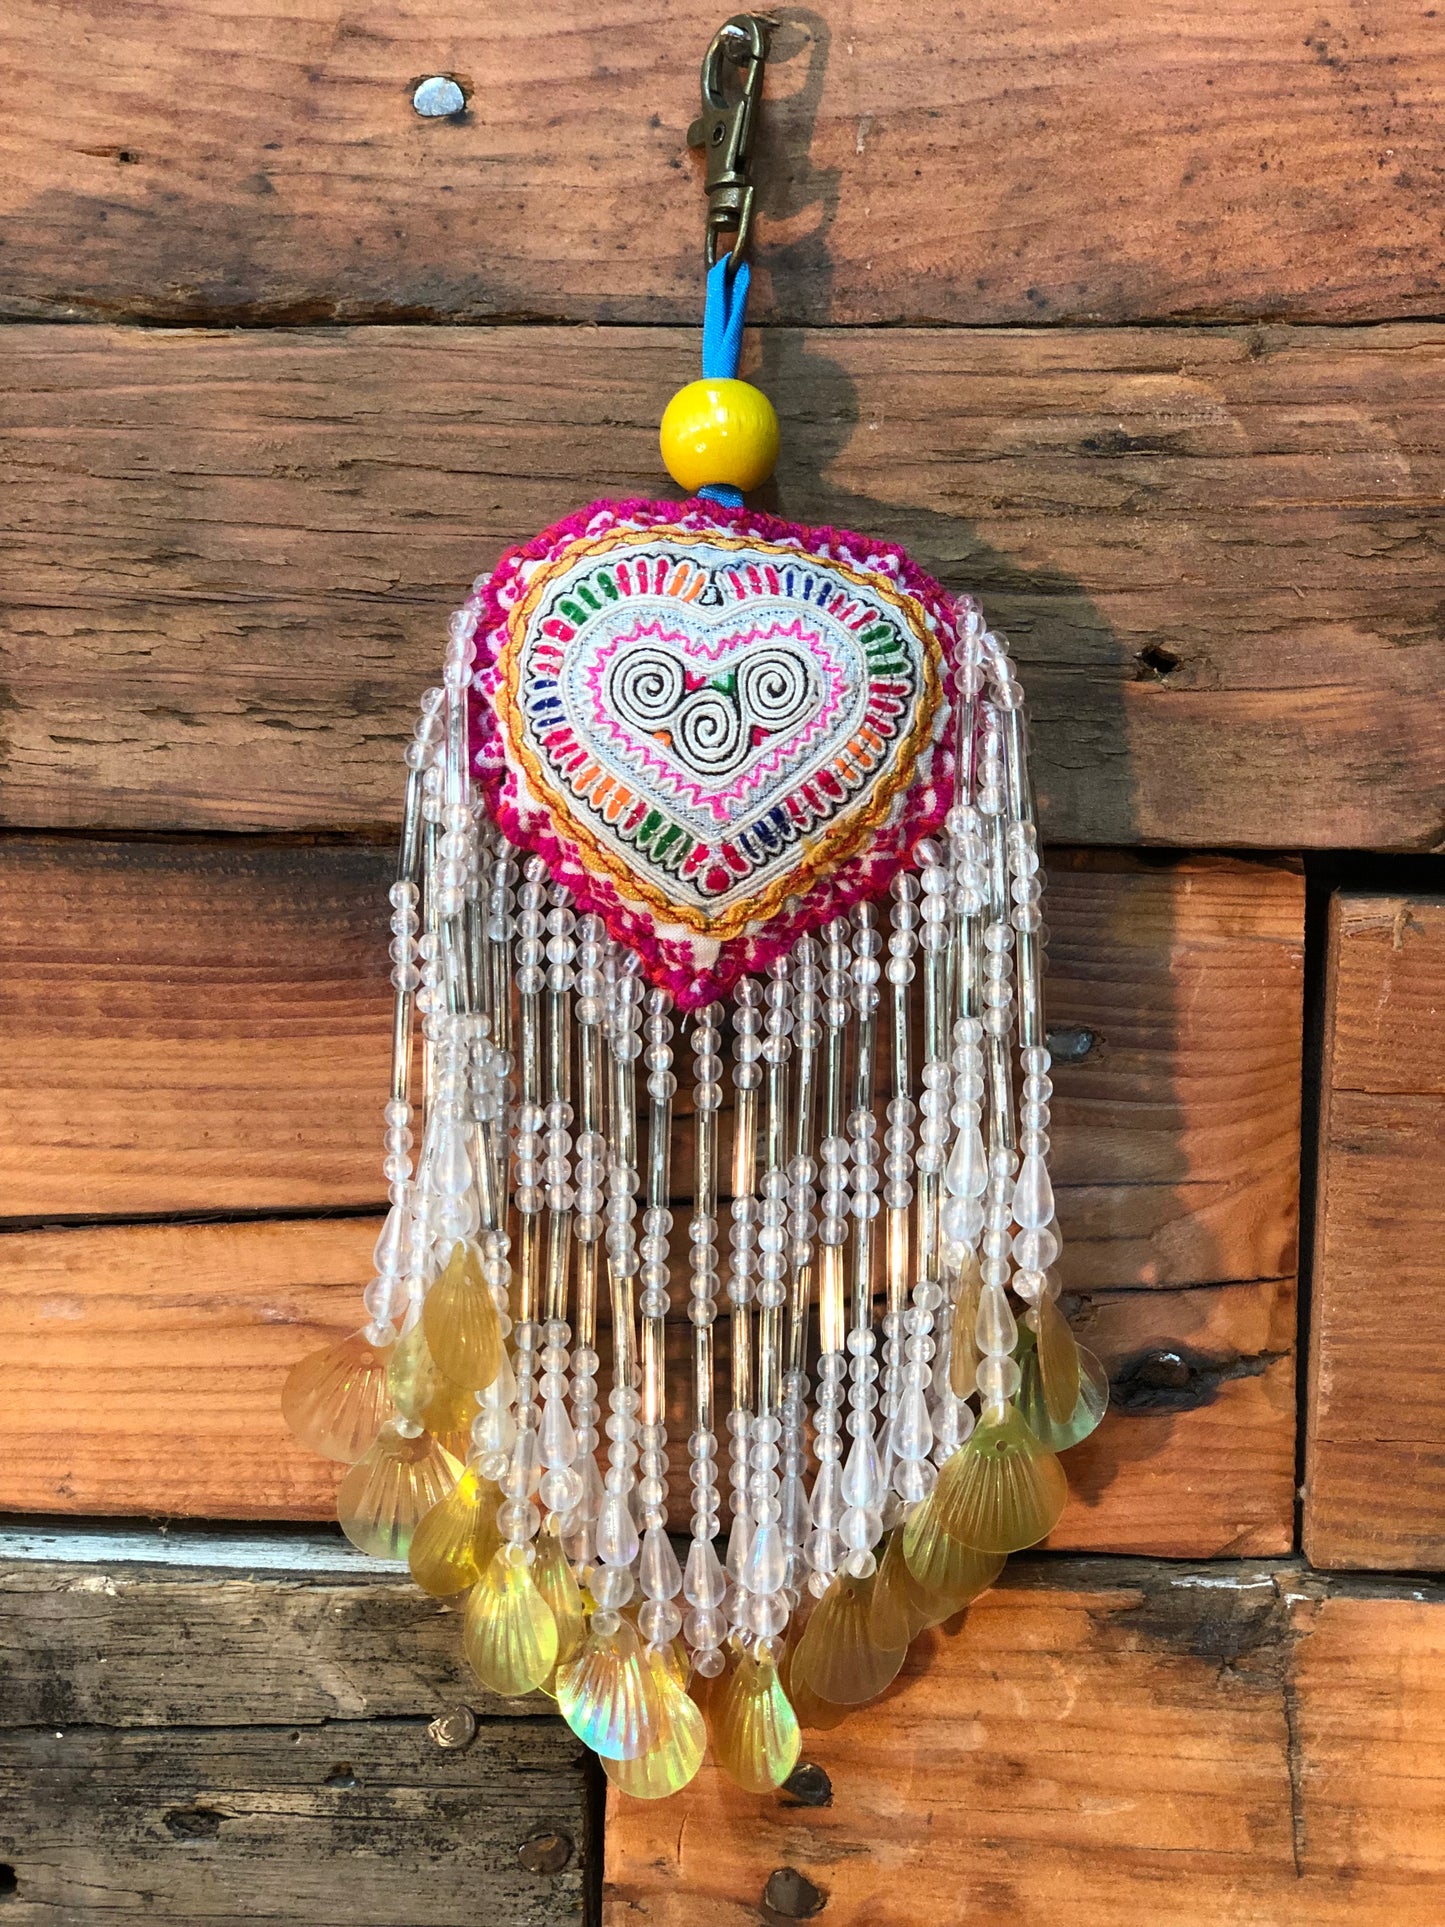 Heart Key Ring with beads